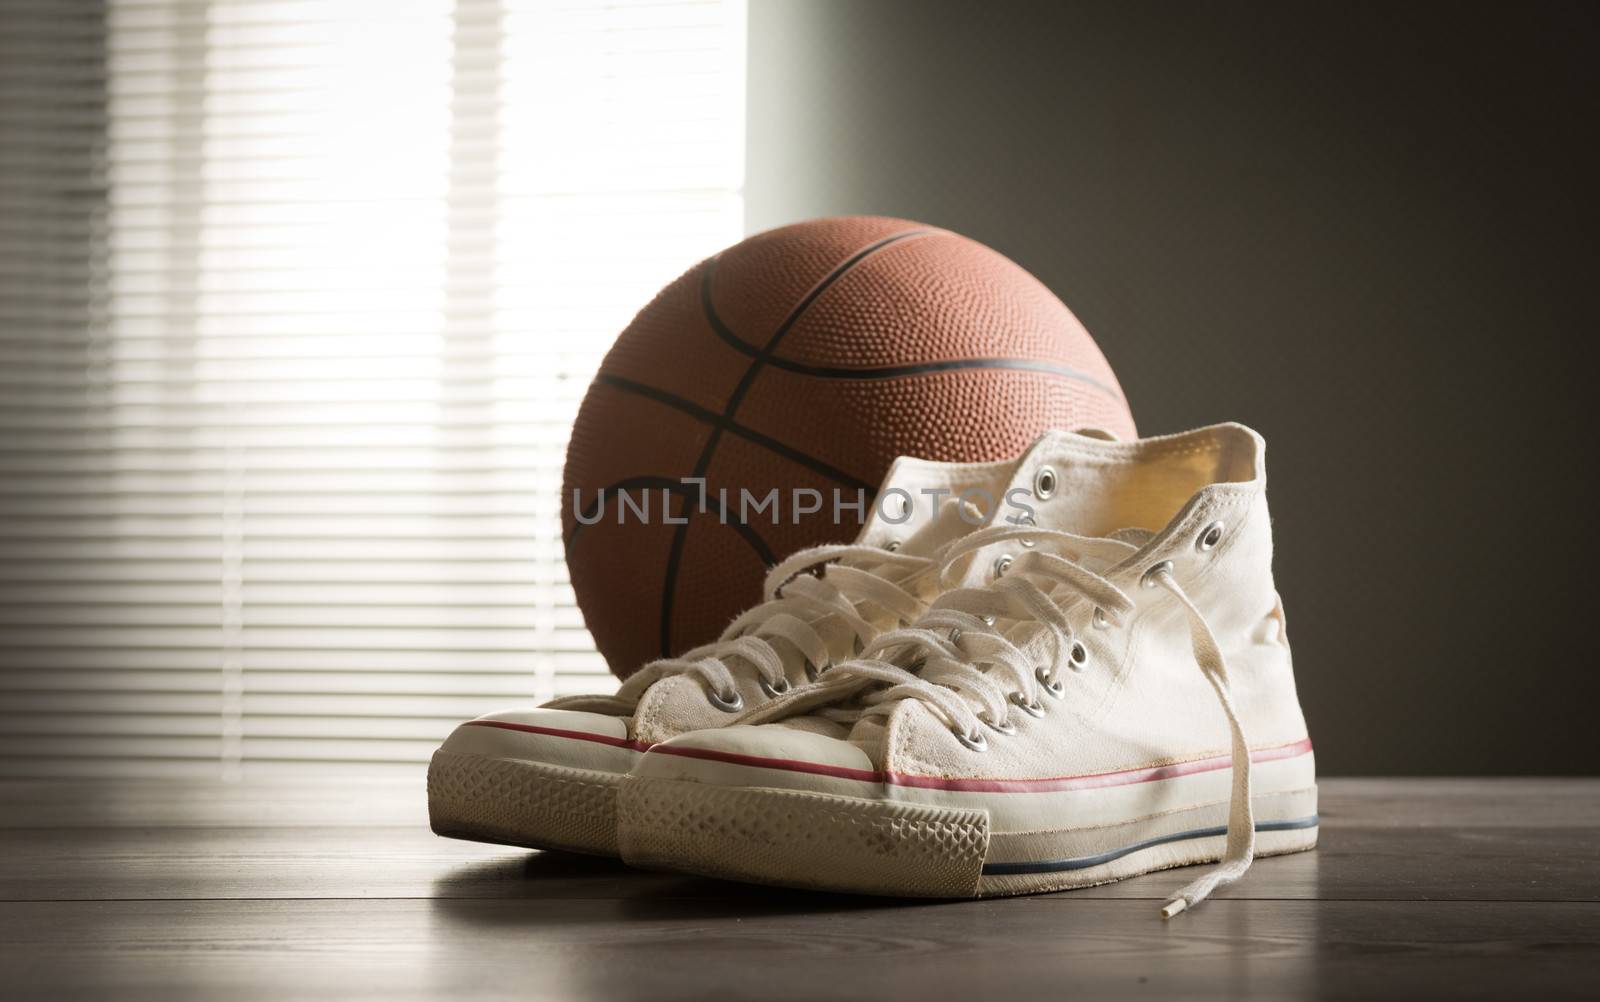 White sneakers with basketball on a wooden table.